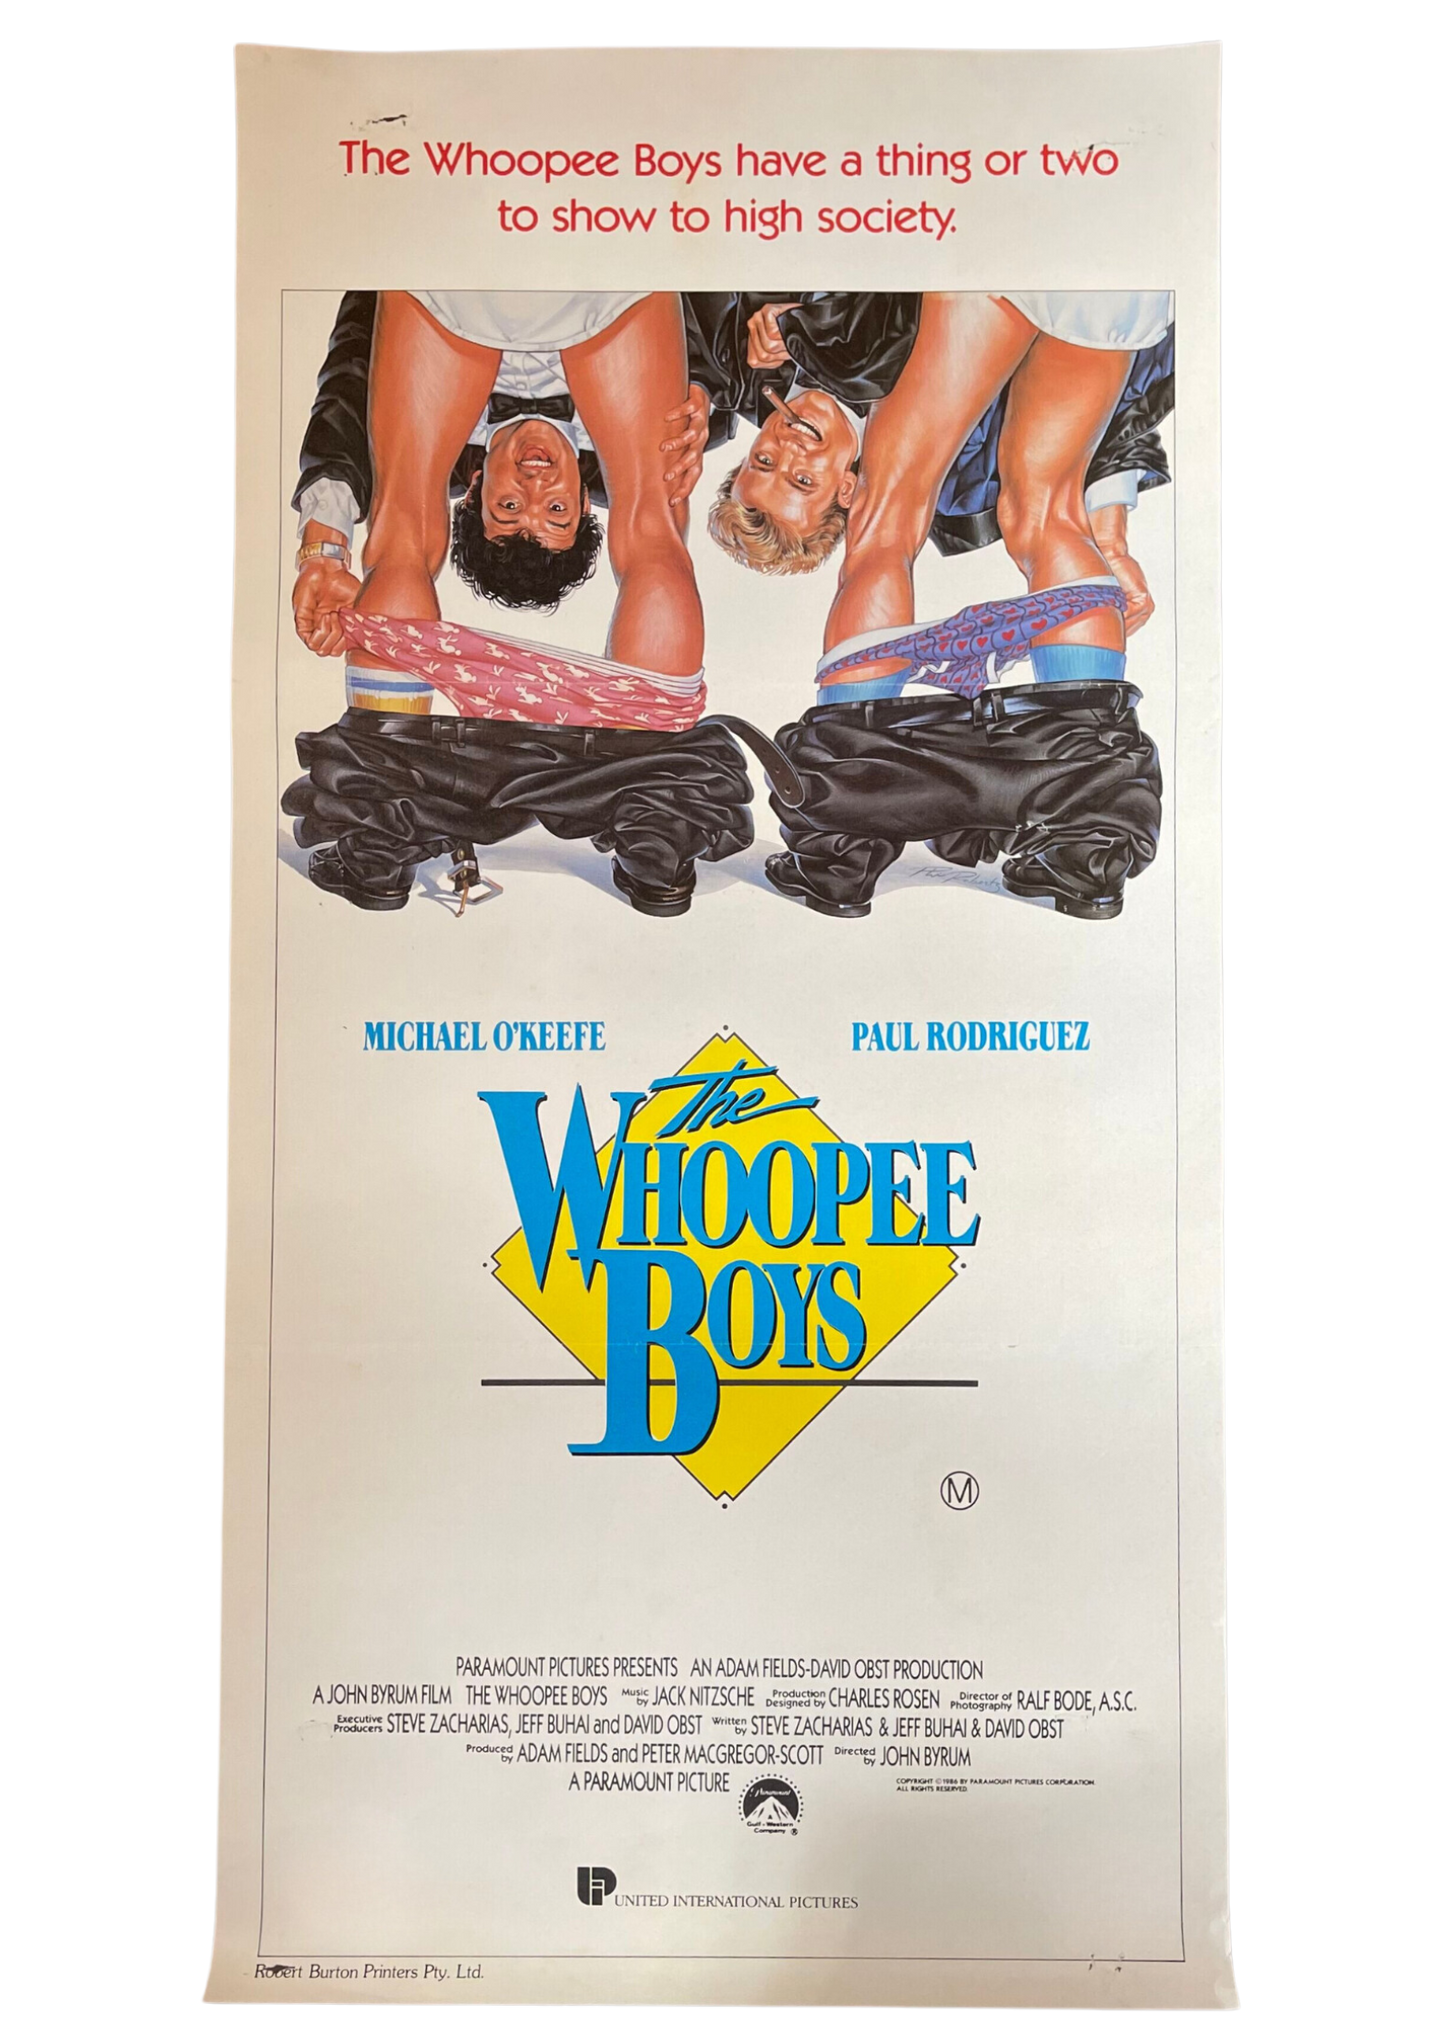 The Whoopee Boys (1986) - Daybill